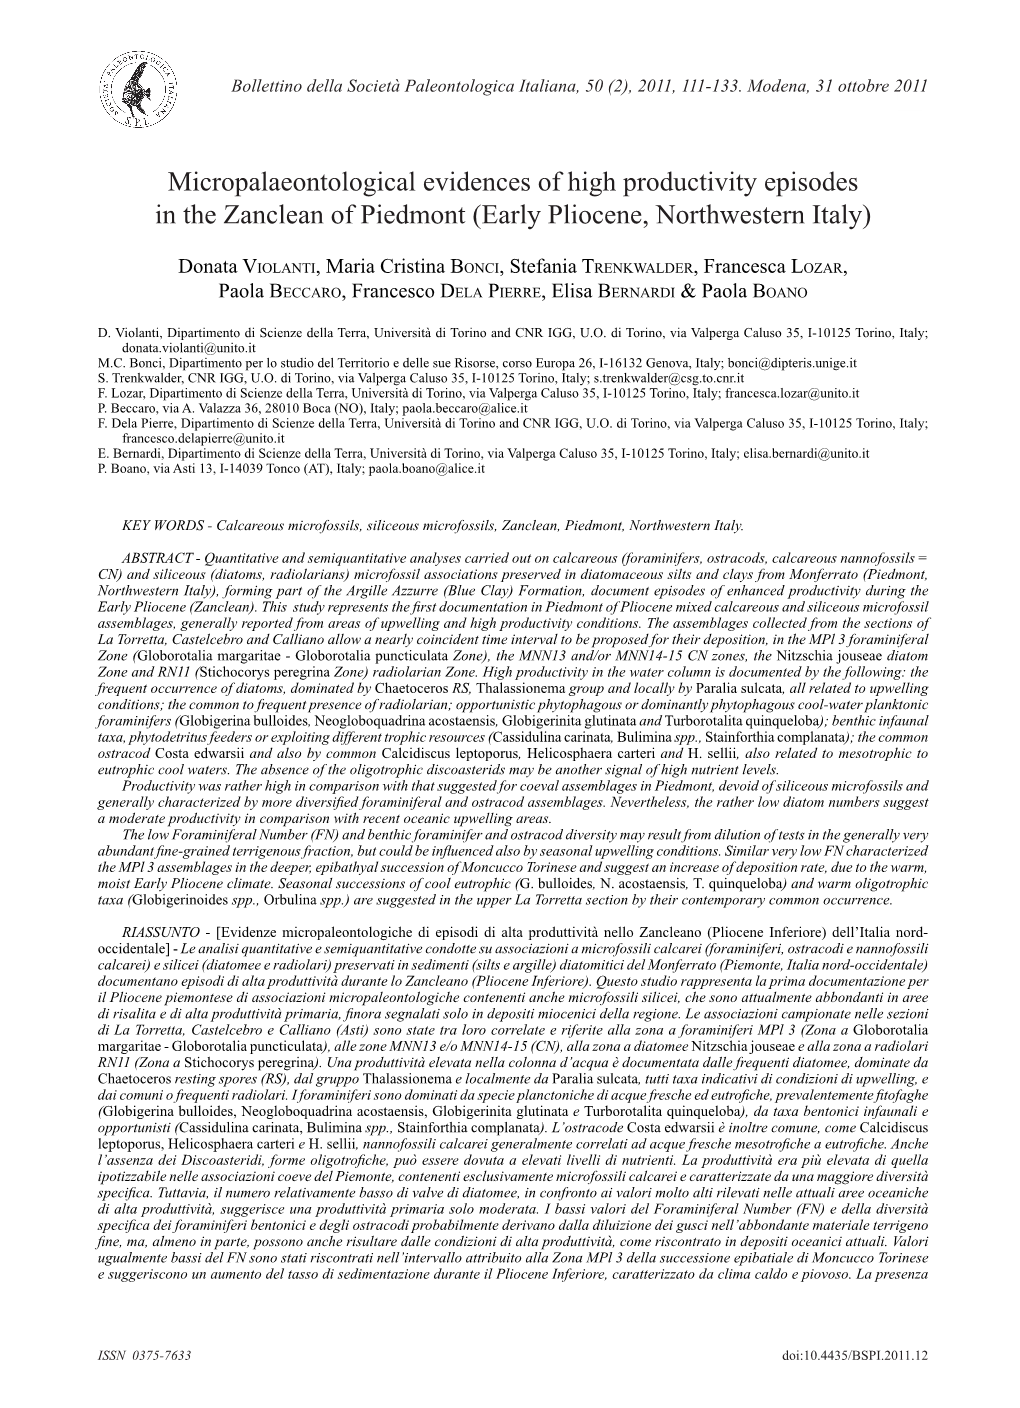 Micropalaeontological Evidences of High Productivity Episodes in the Zanclean of Piedmont (Early Pliocene, Northwestern Italy)